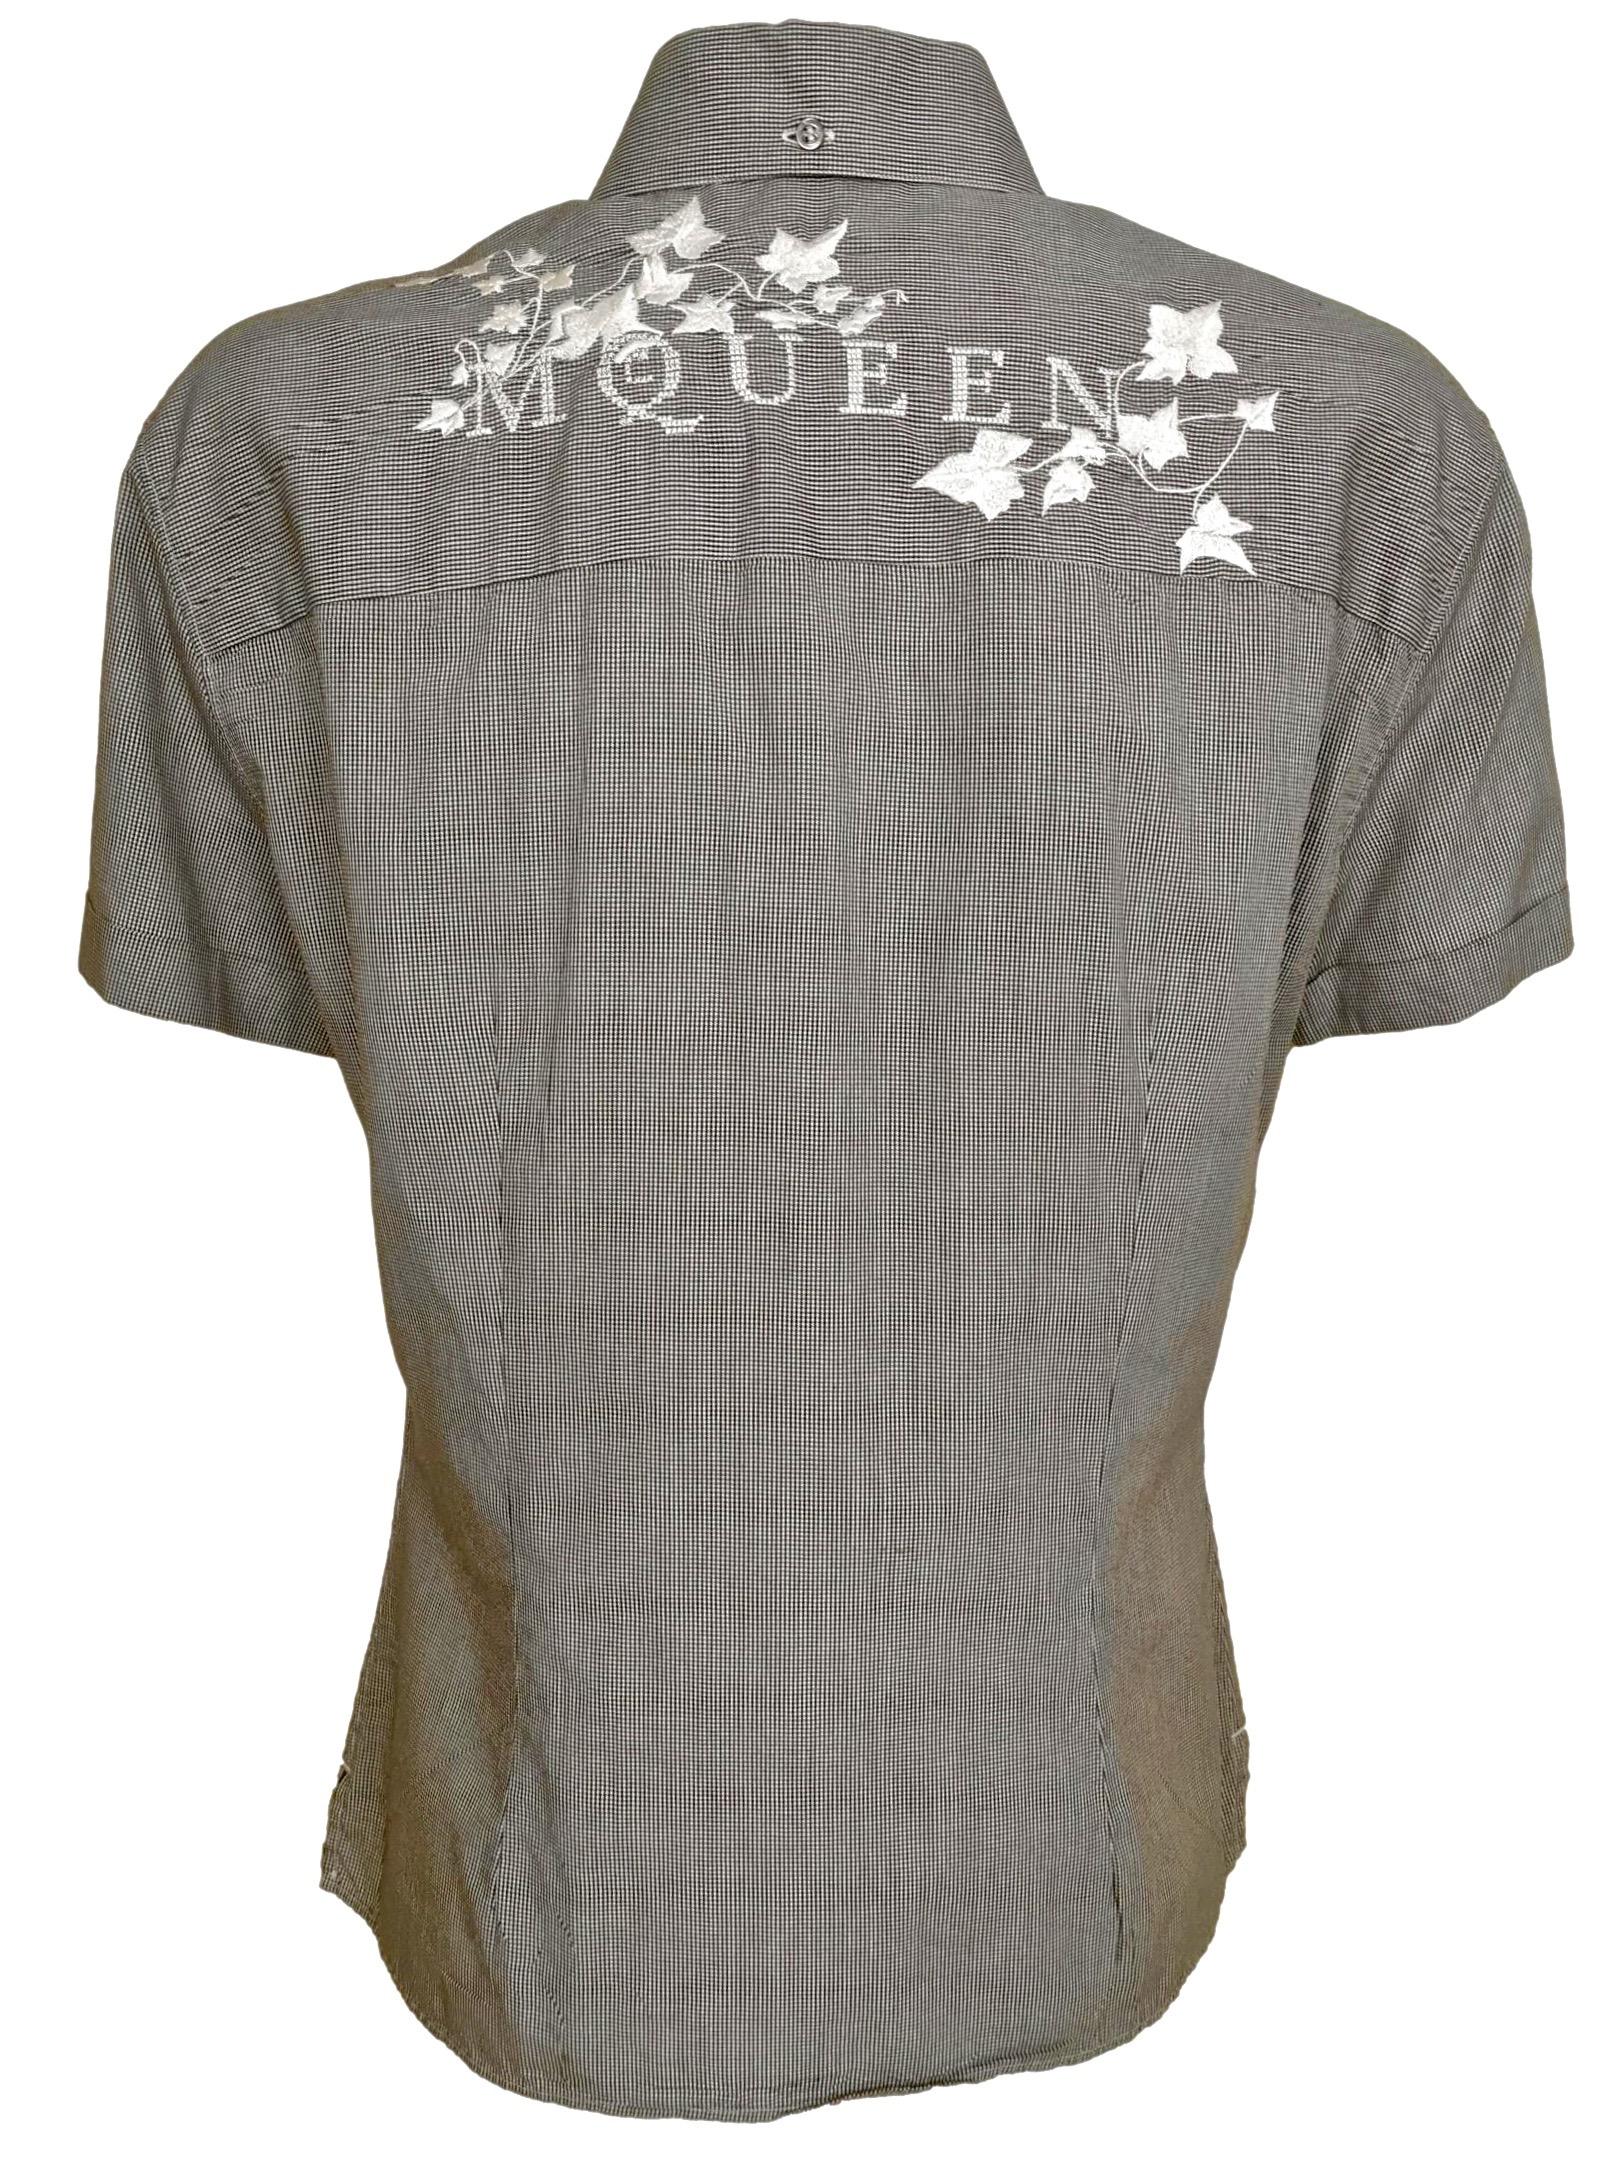 Alexander McQueen Early 1990s Ivy Leaf Embroidered Logo Shirt For Sale 11